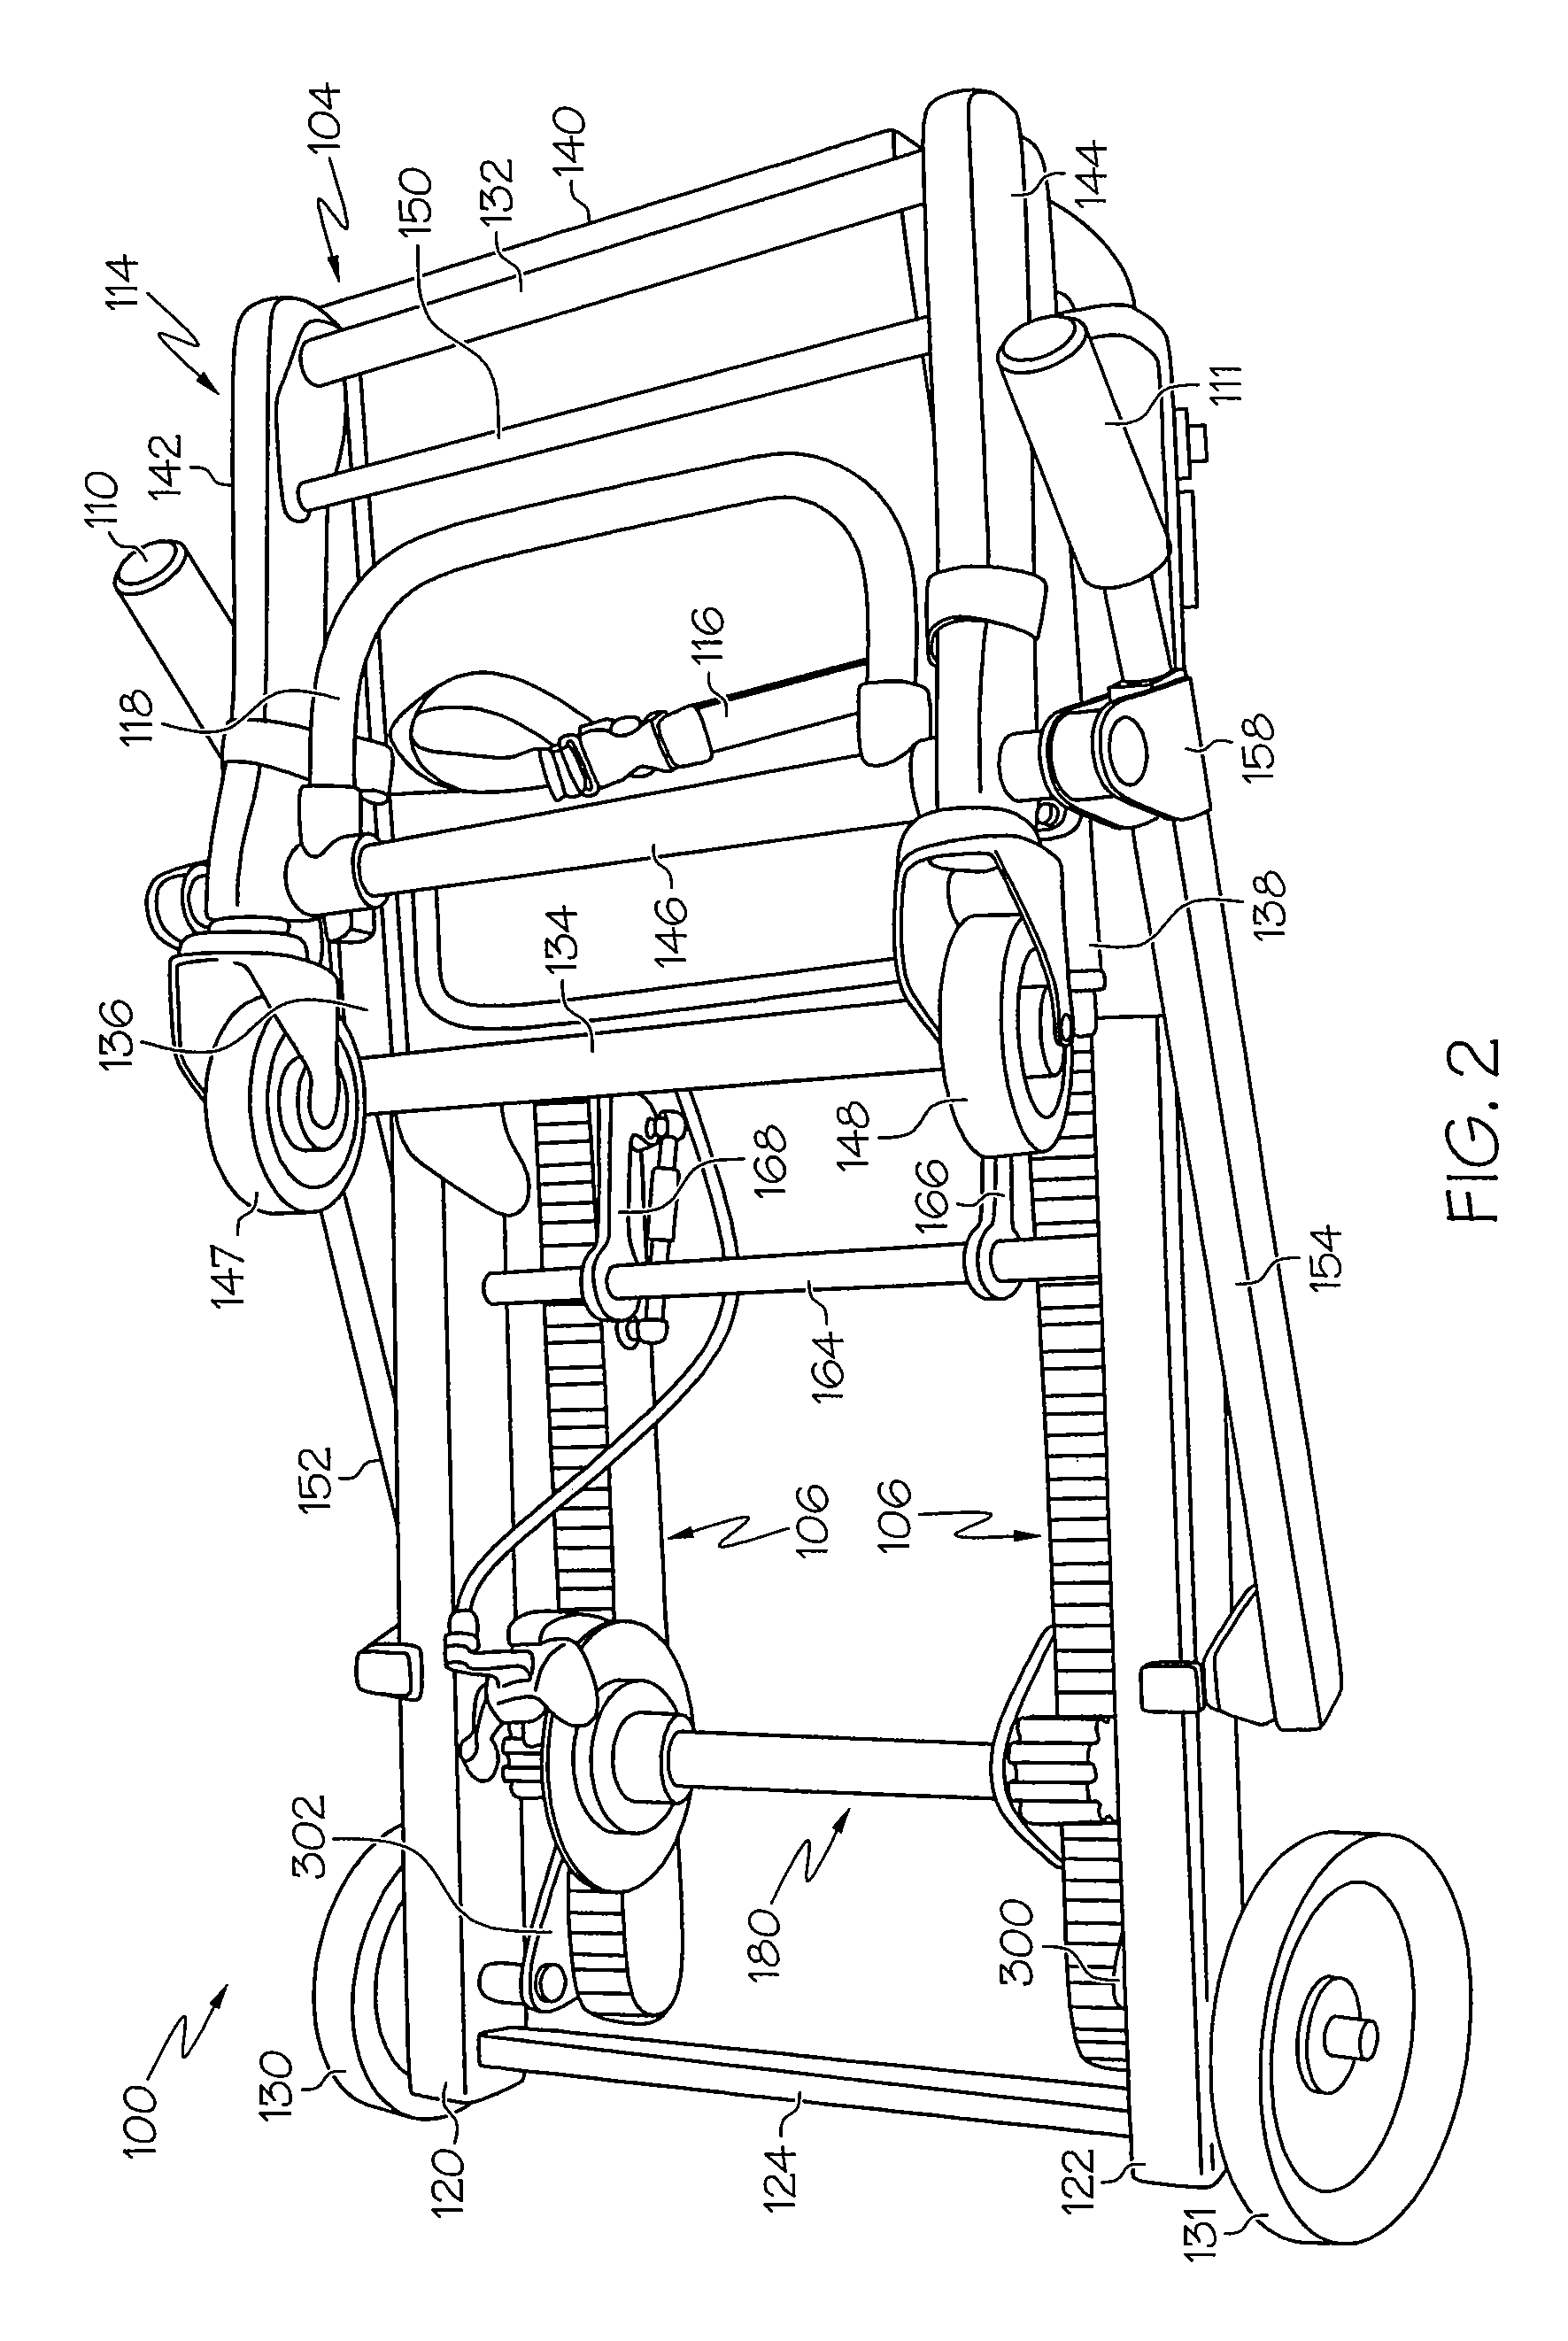 Stair chair with an adjustable glide track resistance and braking device